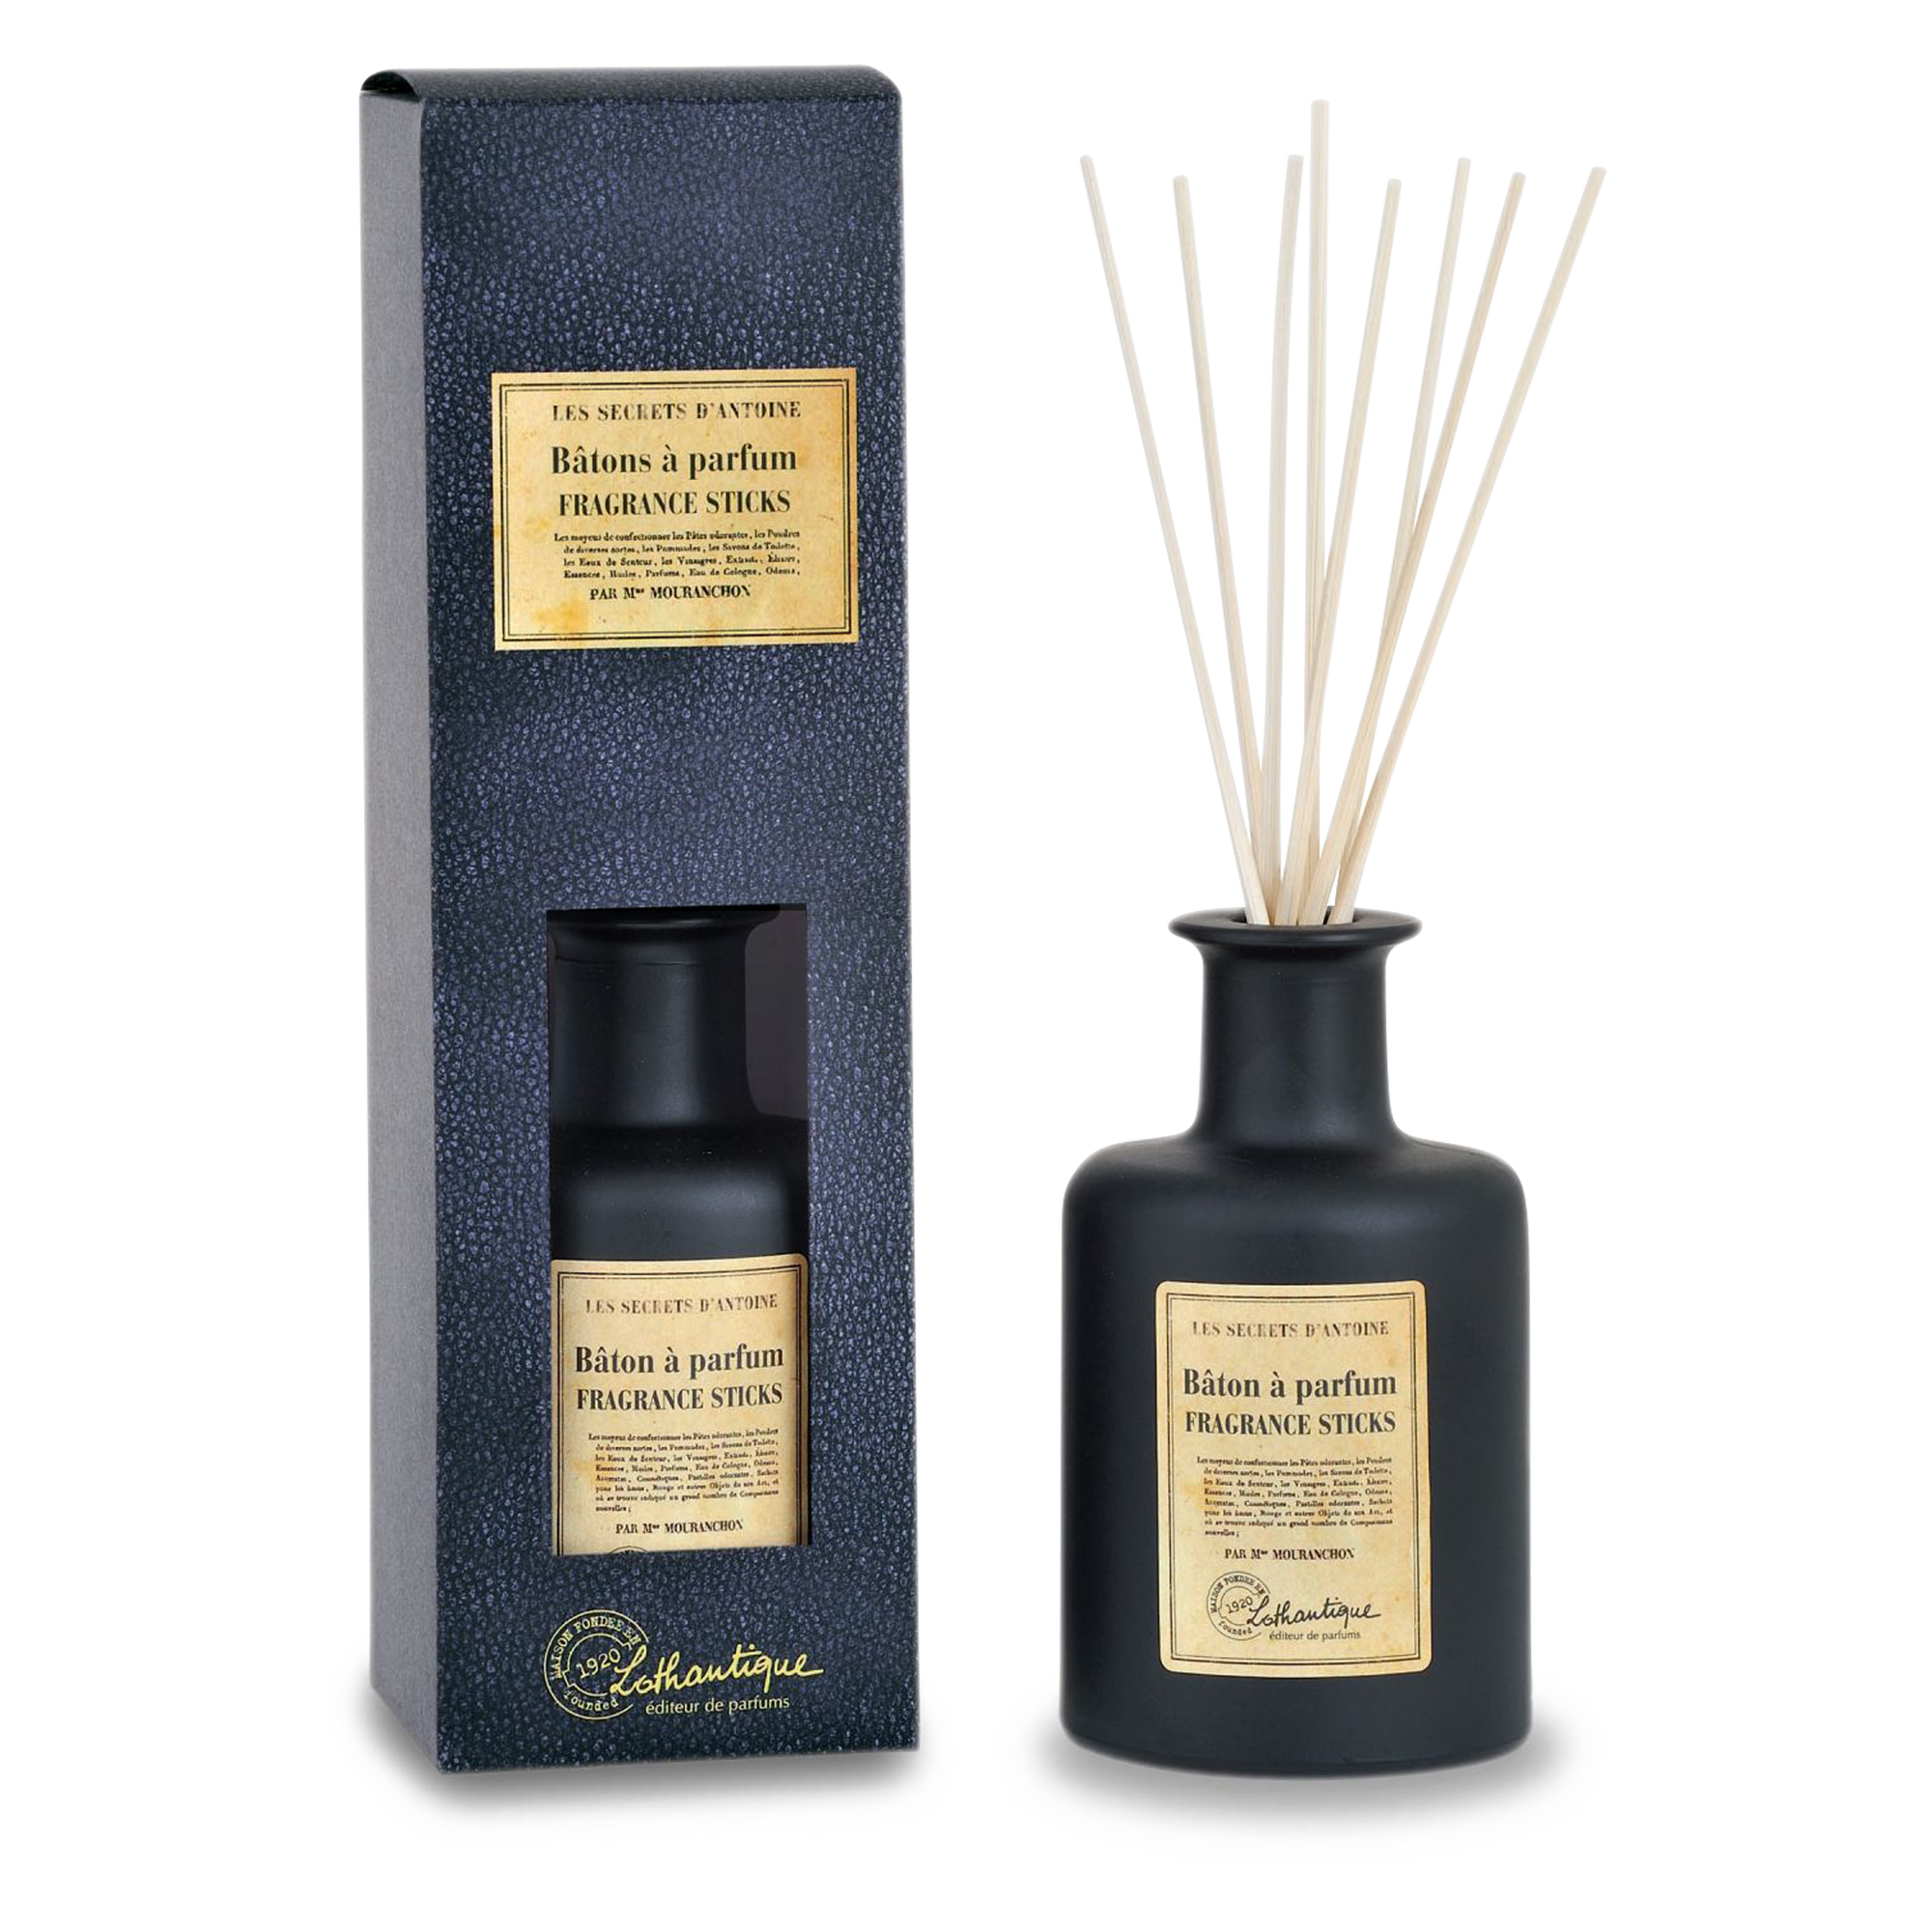 A uniquely blended fragrance, comprised of a spicy Cedar base, layered with a hint of Green Moss, and top notes of Tangerine.